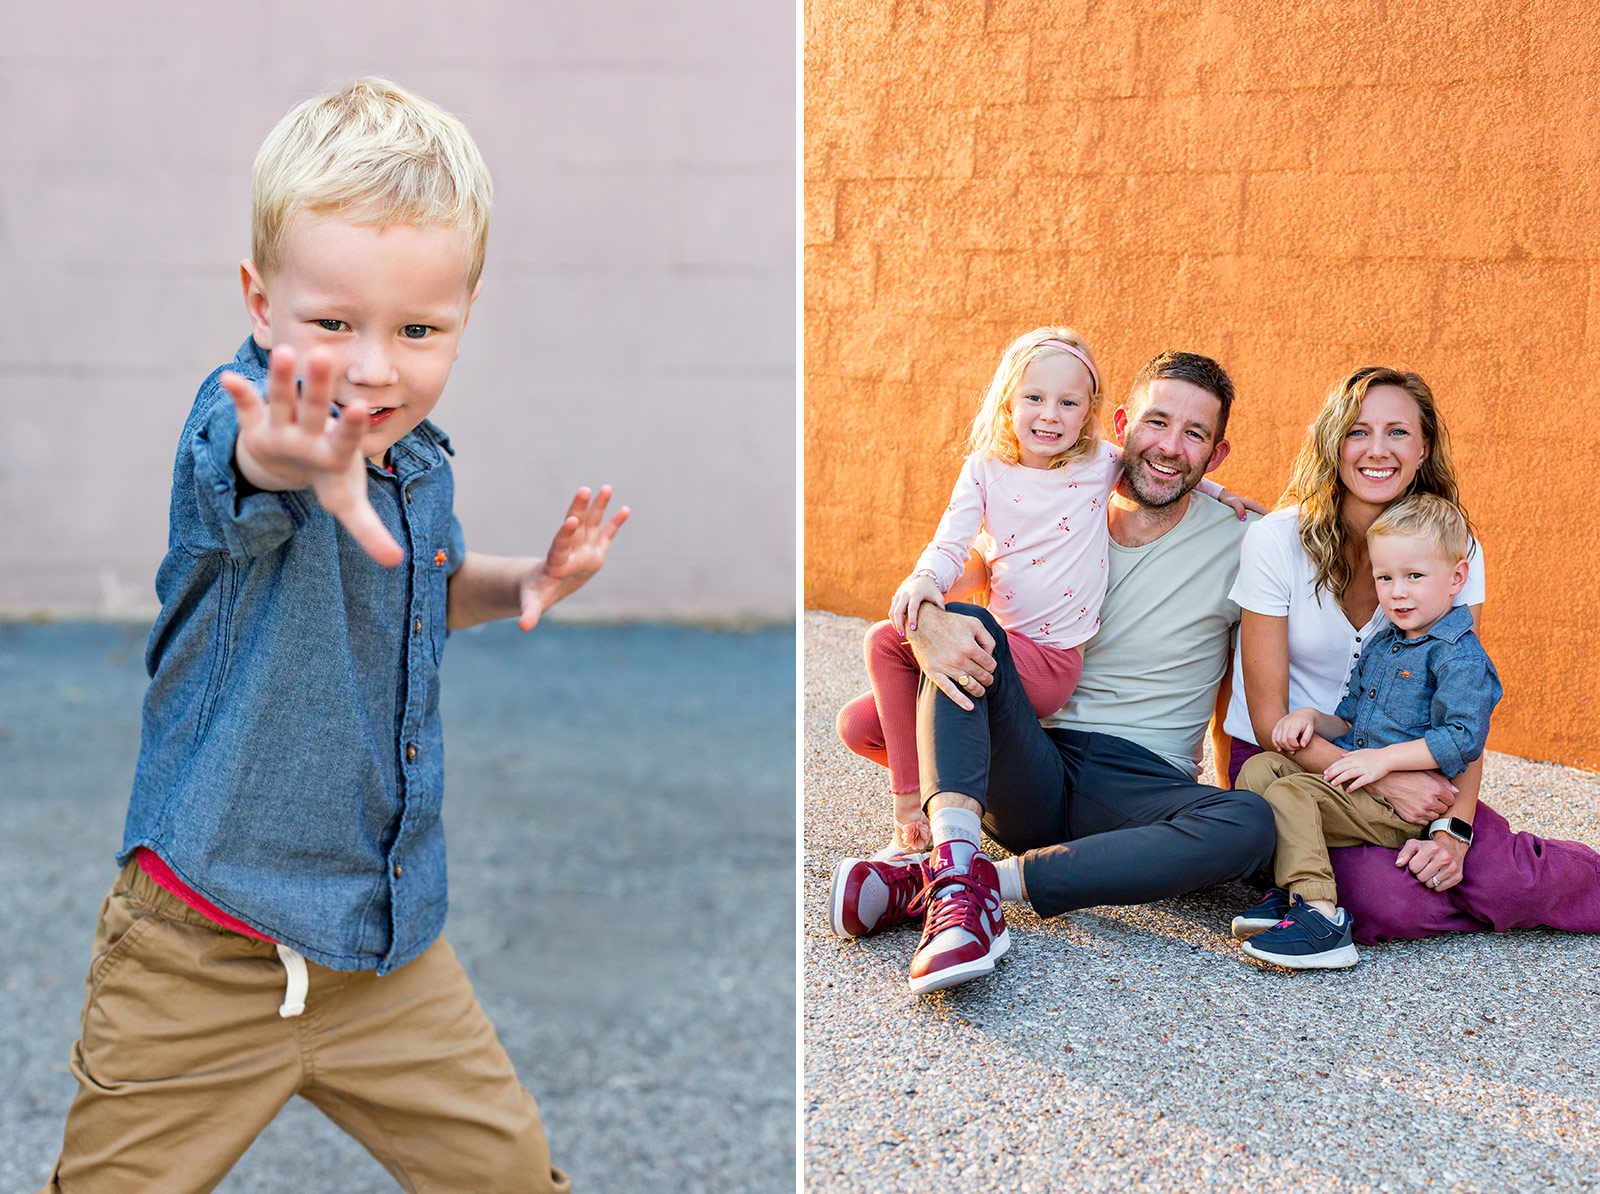 Jonah shows off his best ninja moves. The family poses for a casual portrait.